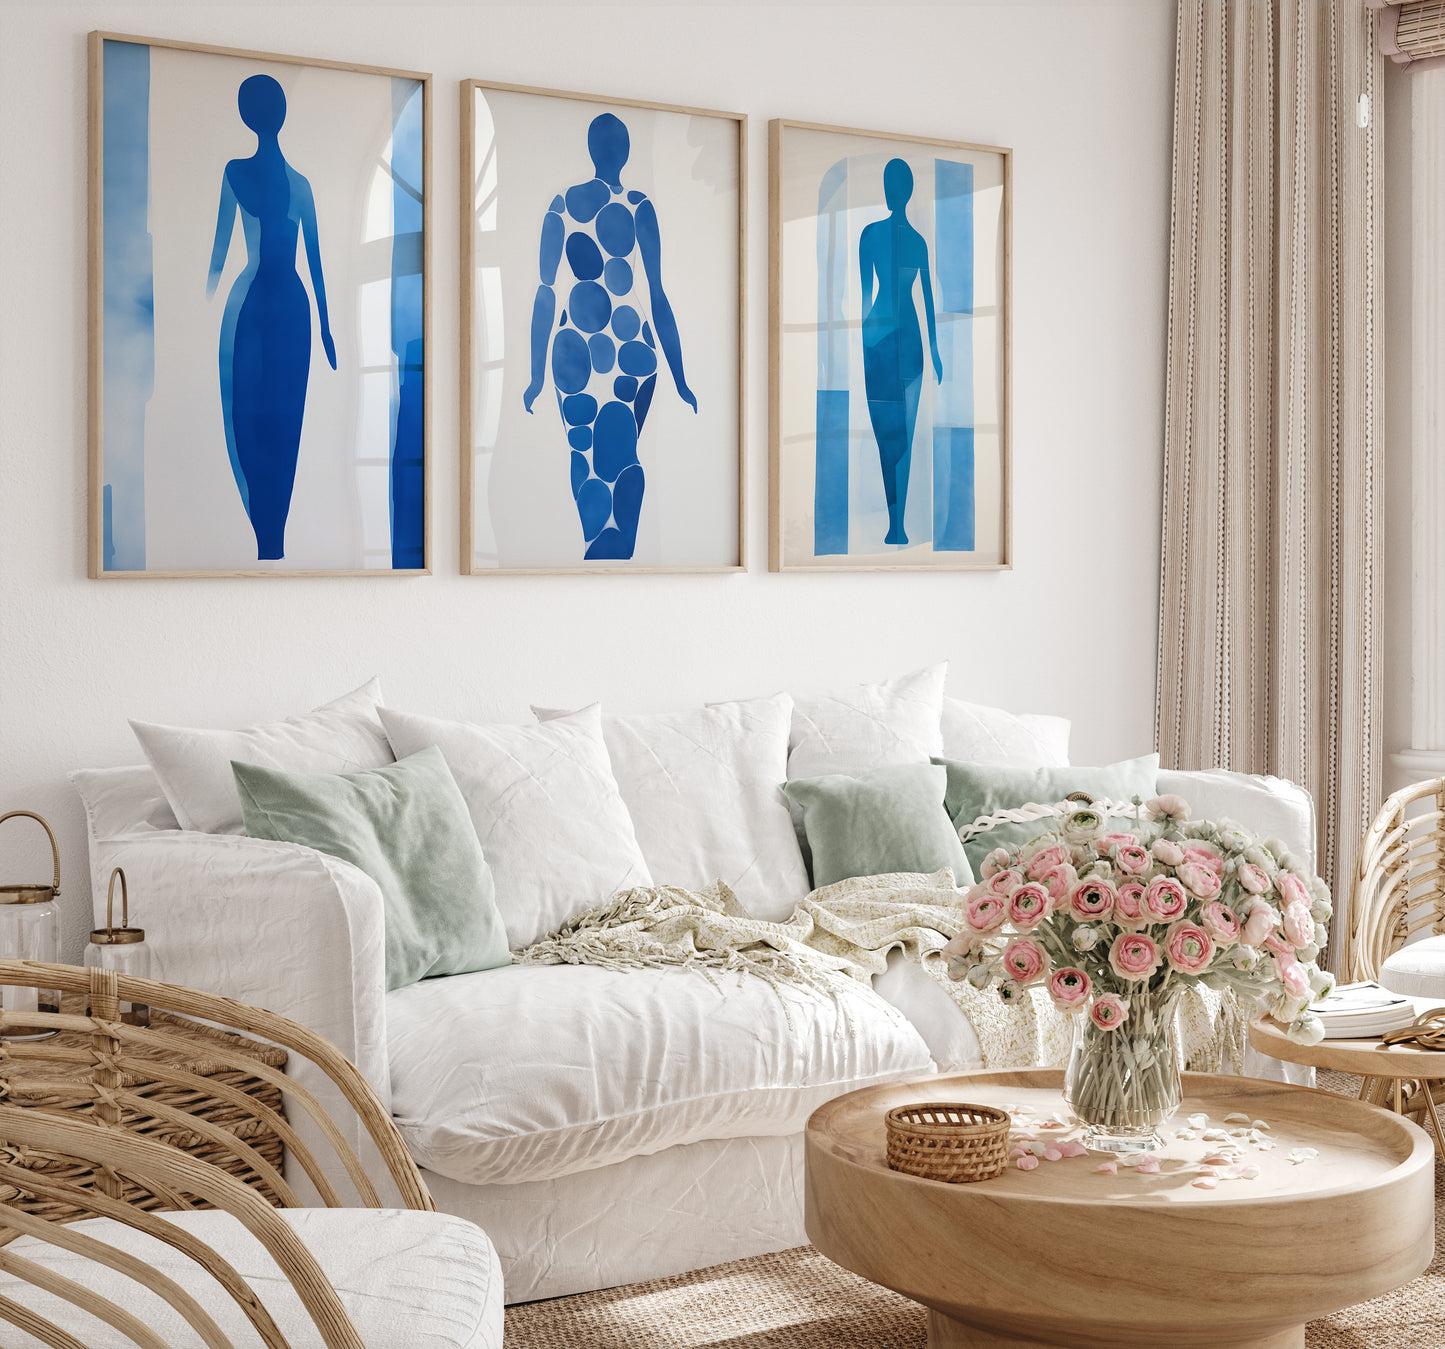 Three abstract blue human silhouette artworks on a white living room wall above a sofa.